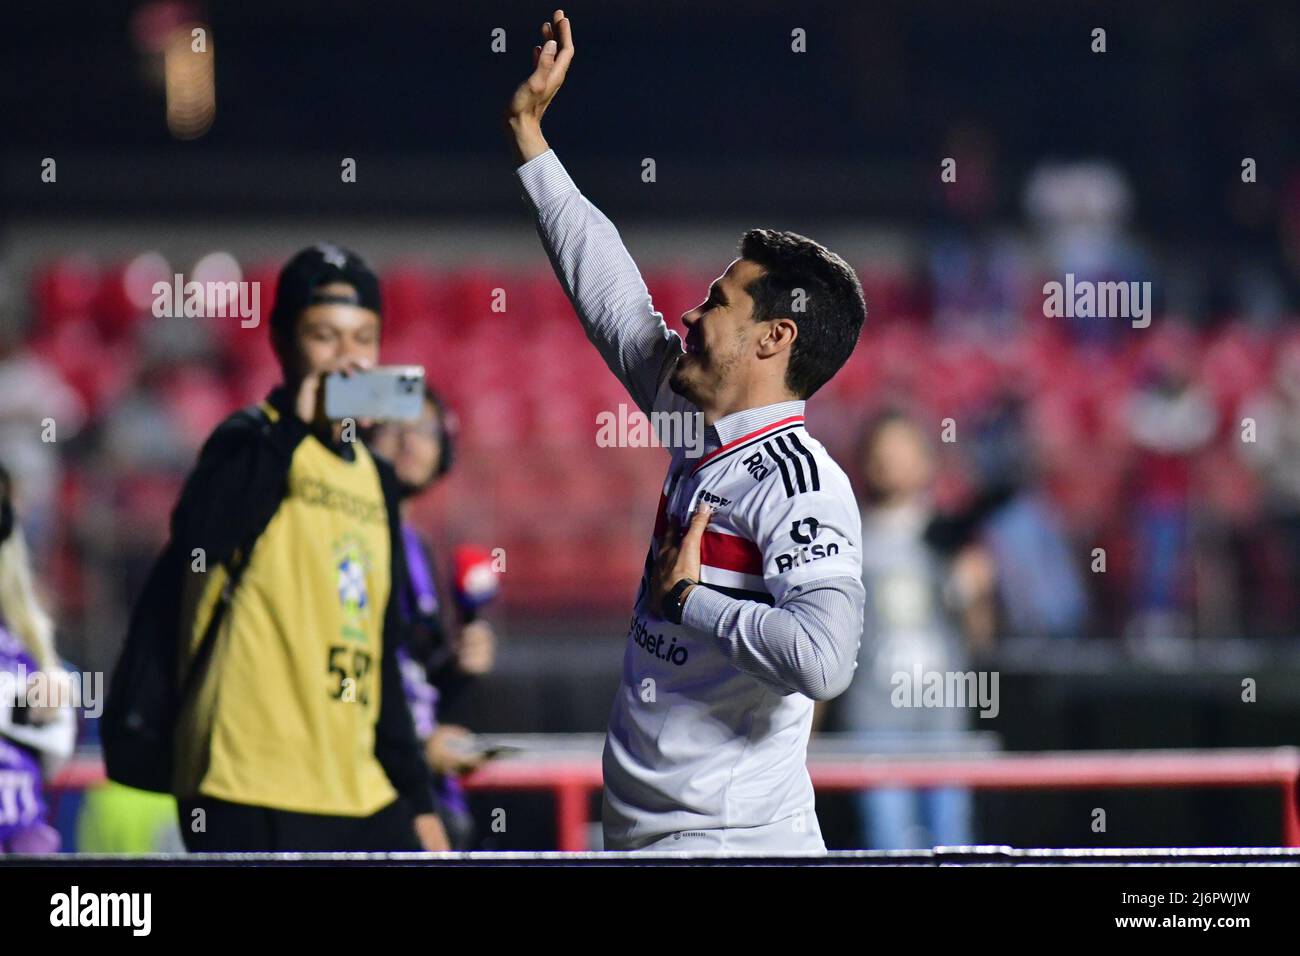 SÃO PAULO, BRASIL - MAY 2: Football player Hernanes of Brazil announces his retirement from football after an 18-year career. His career included spells at São Paulo F.C, Lazio, Inter Milan, and Juventus among other clubs. The midfielder receives a tribute before the Campeonato Brasileiro Série A 2022 match between São Paulo F.C and Santos F.C at Morumbi Stadium on May 2, 2022, in Sao Paulo, Brazil. (Photo by Leandro Bernardes/PxImages) Stock Photo